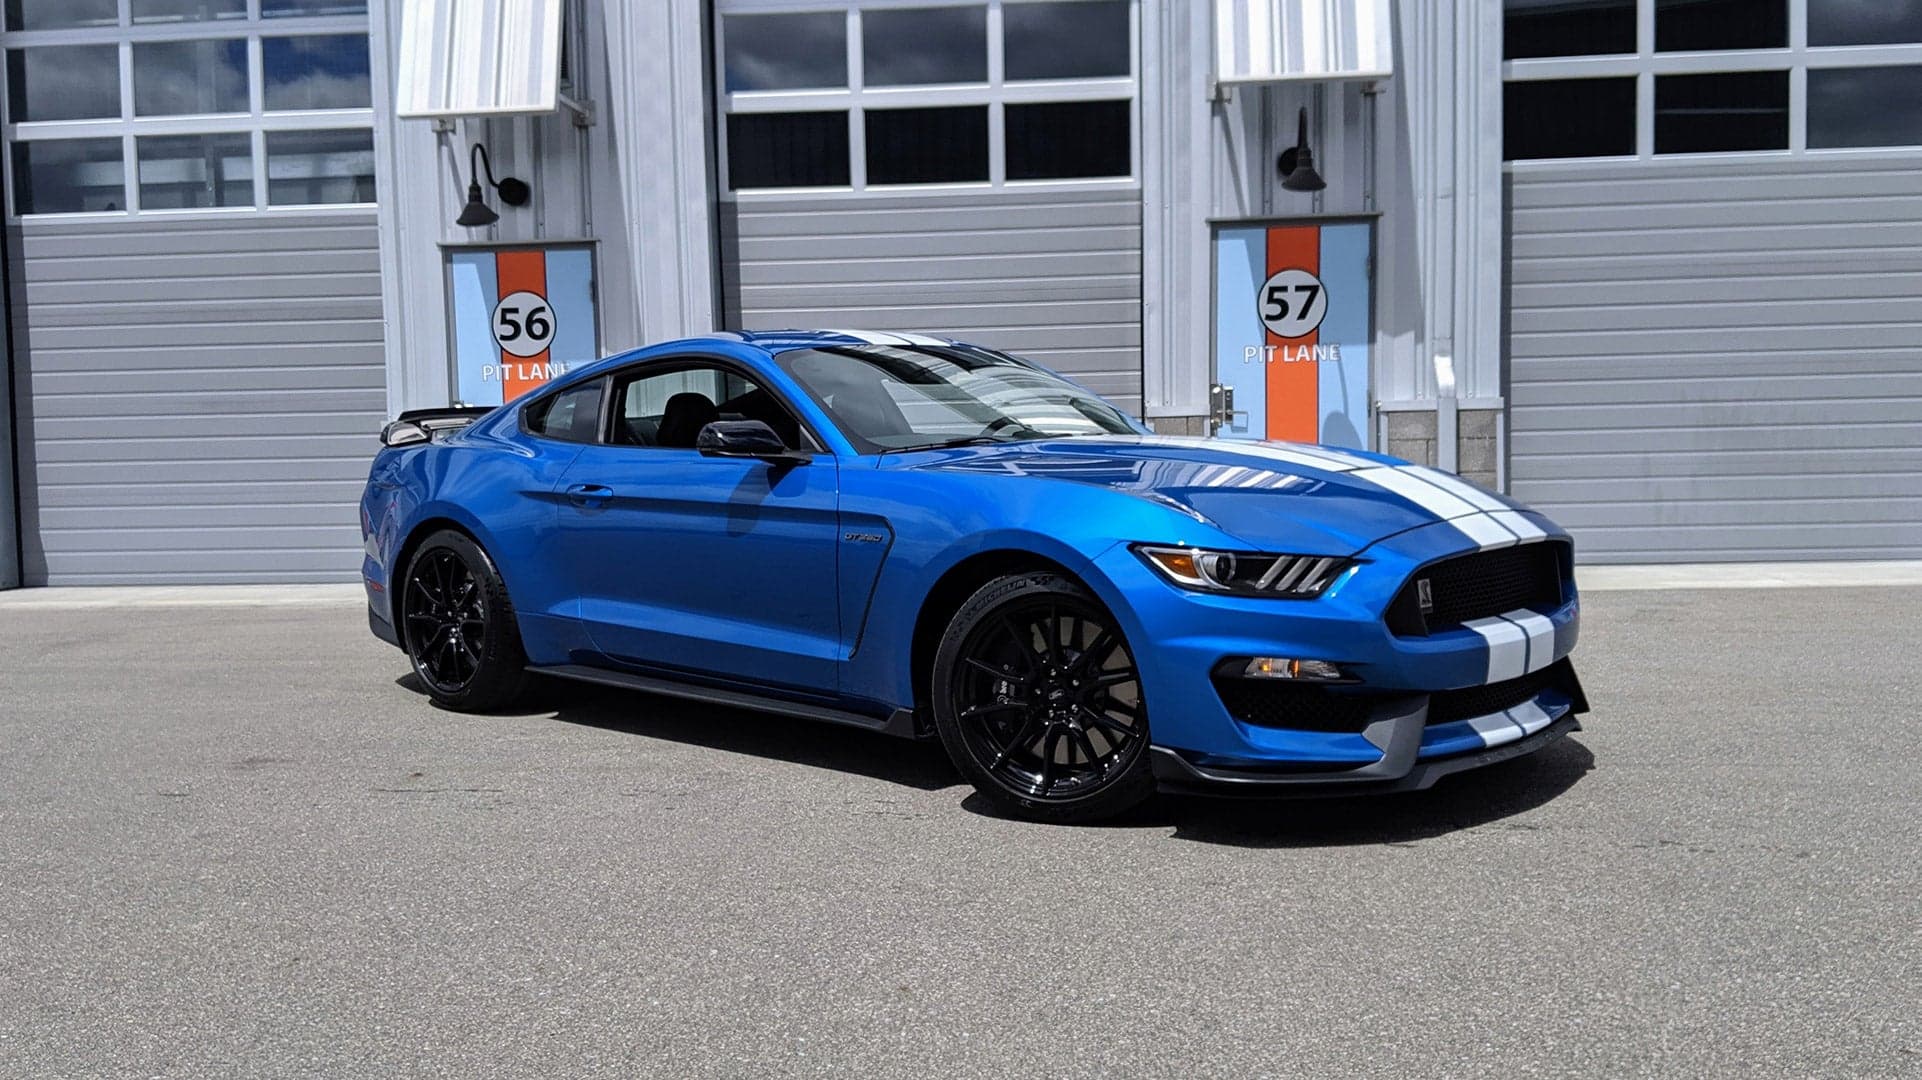 Five Things to Know About the 2019 Ford Mustang Shelby GT350